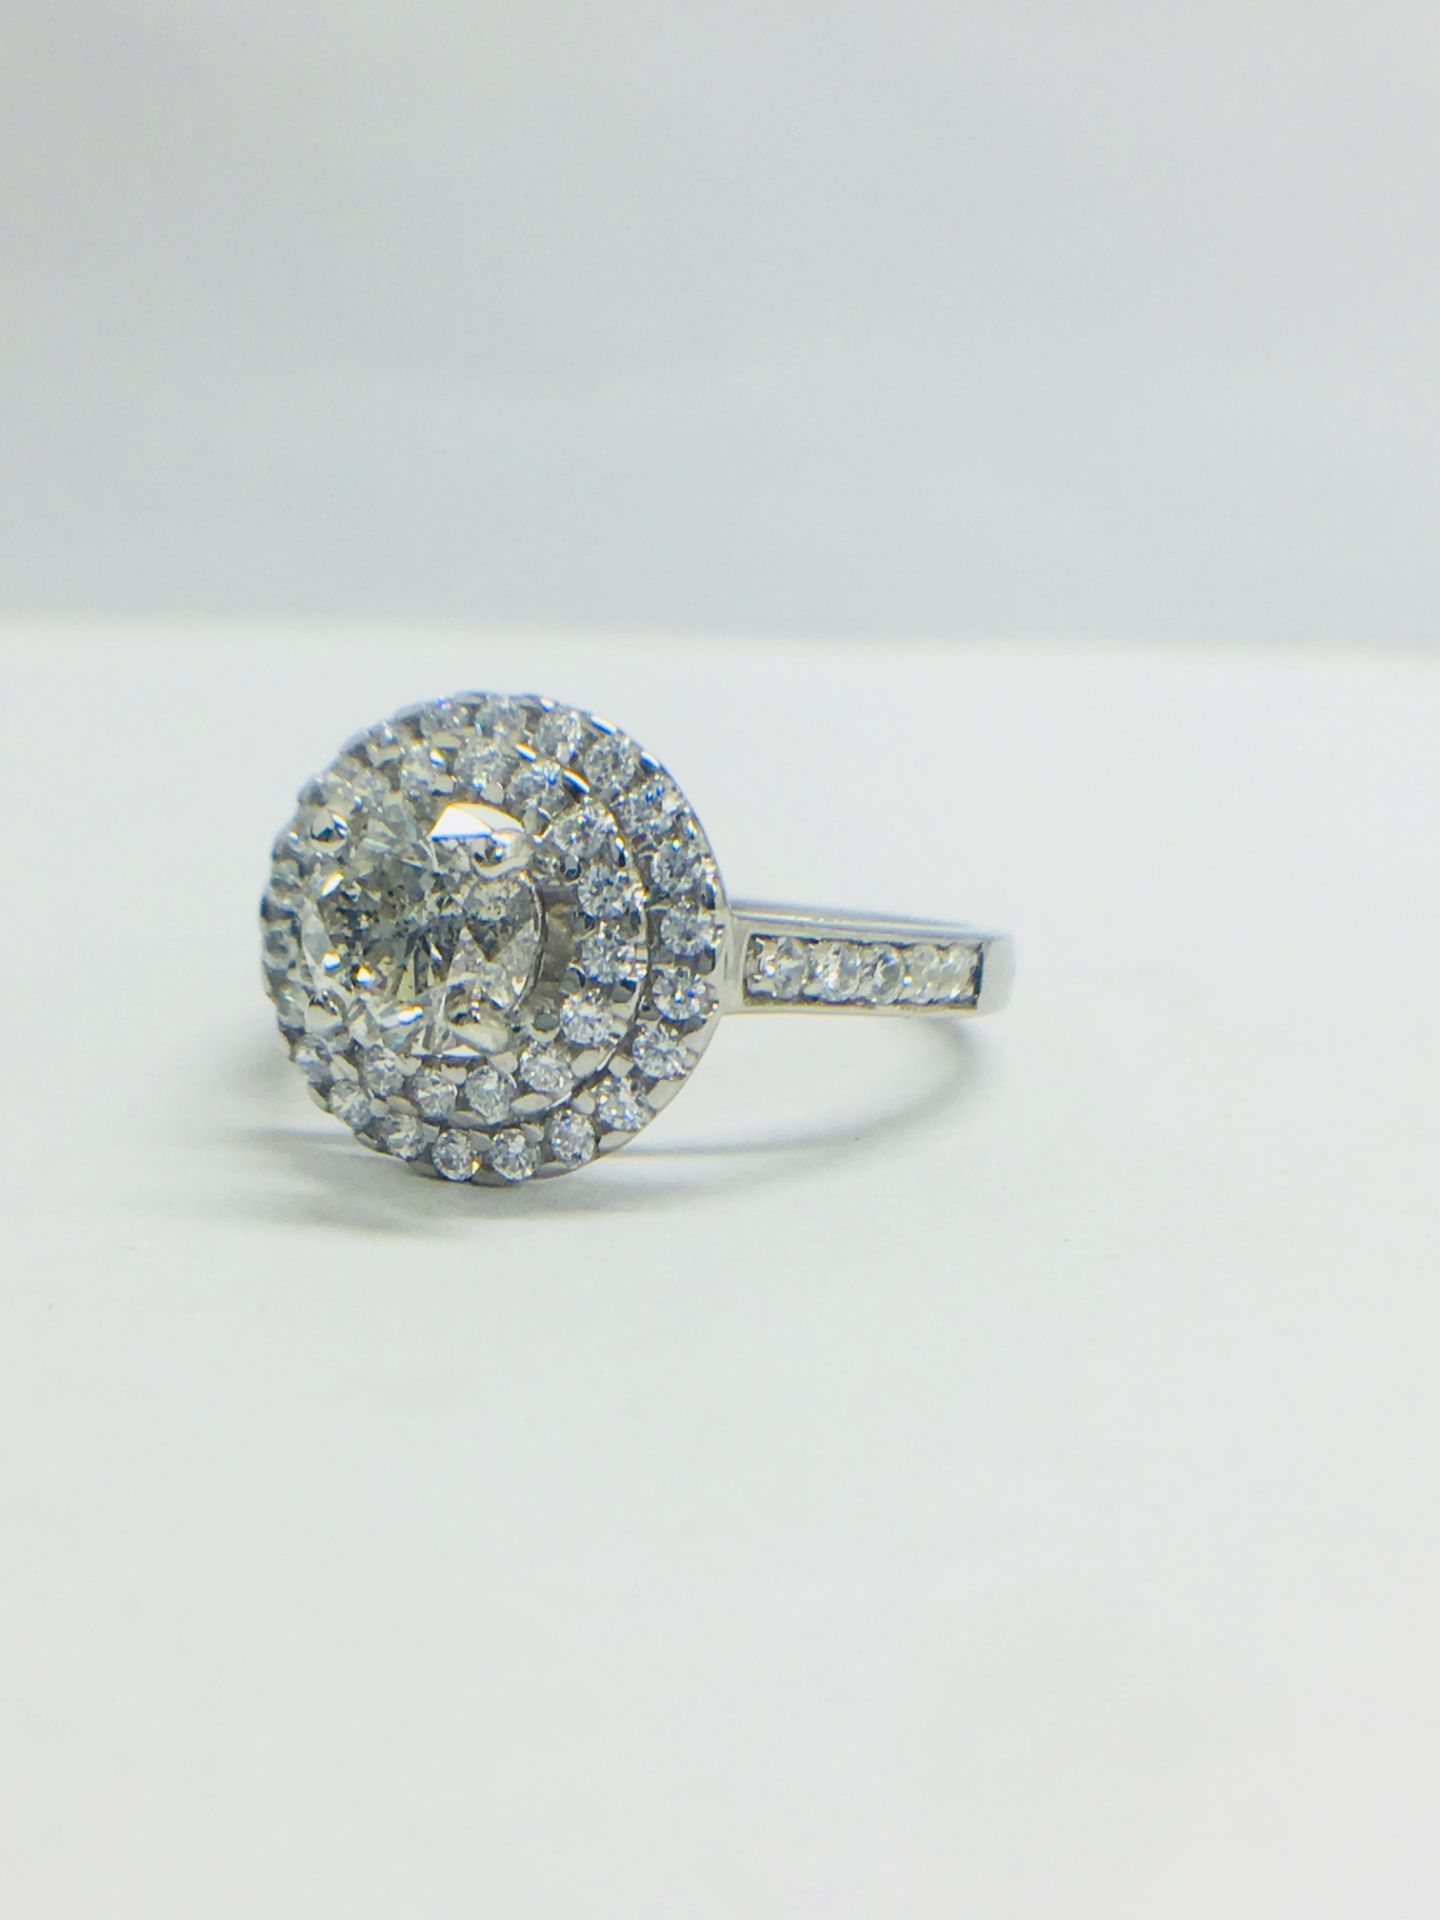 Platinum Double Halo Style Ring1.40Ct Total Diamond Weight, - Image 2 of 11